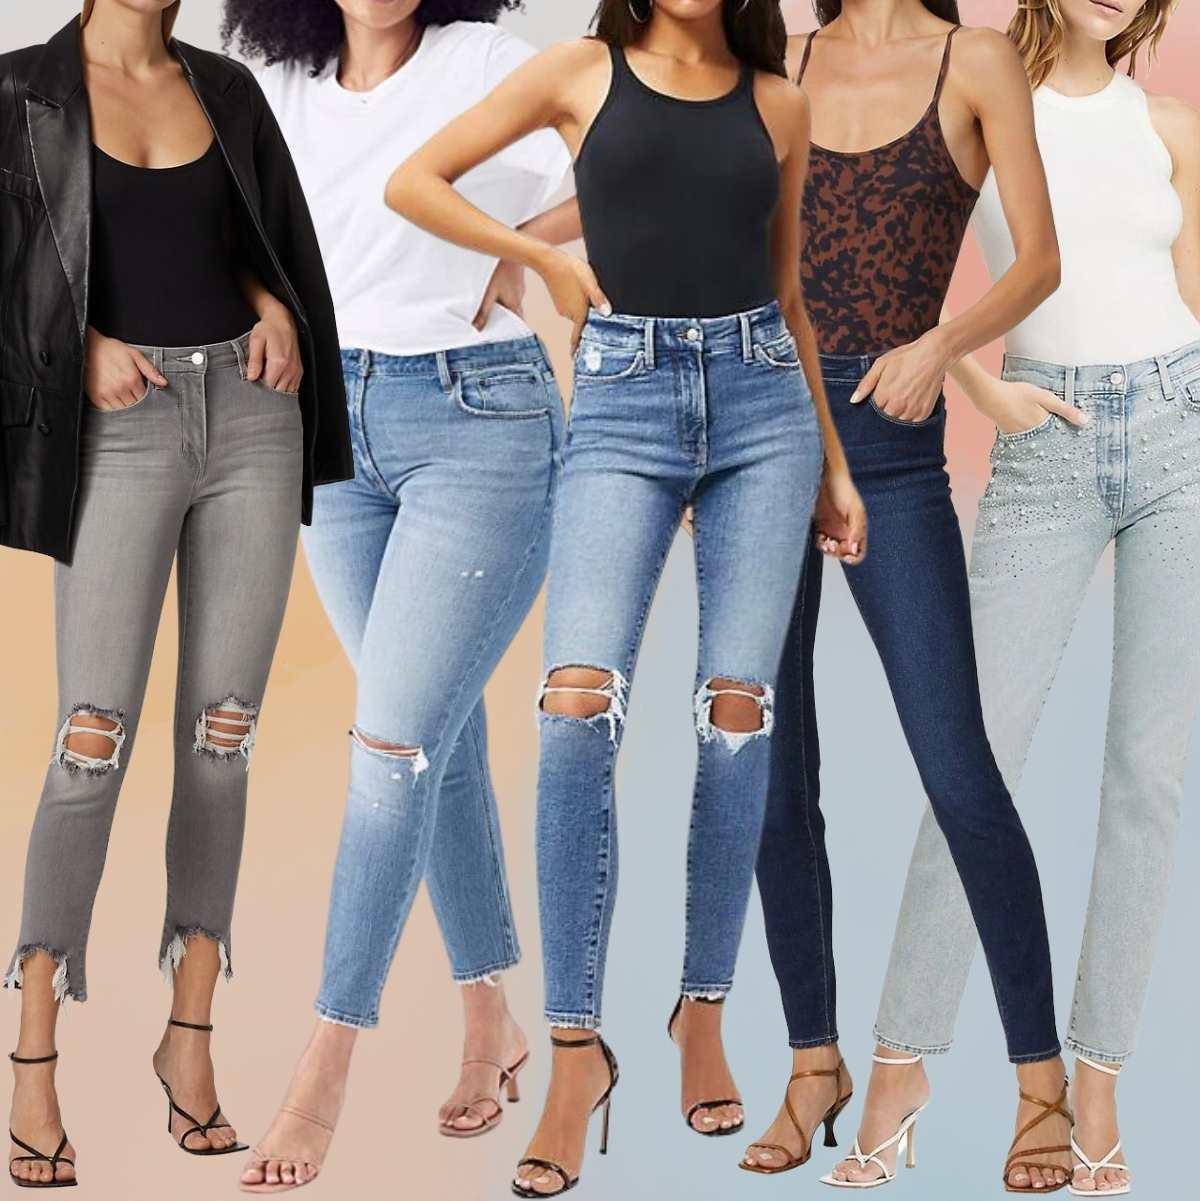 Collage of 5 women wearing strappy high heels with skinny jeans outfits.